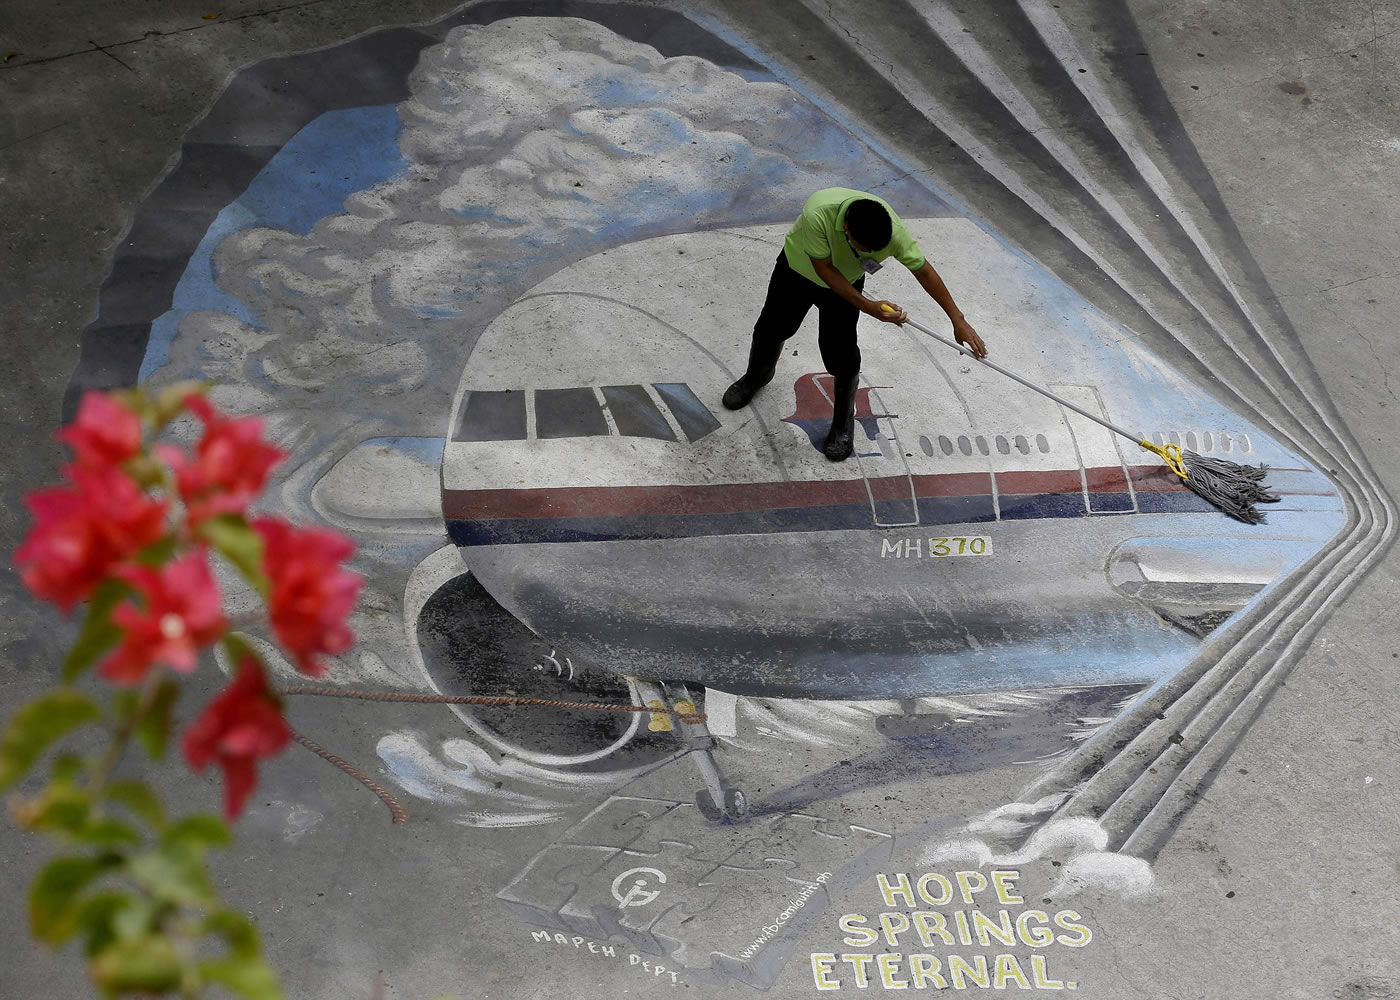 A school utility worker mops a mural depicting the missing Malaysia Airlines Flight 370 at the Benigno &quot;Ninoy&quot; Aquino High School campus at Makati city east of Manila, Philippines.